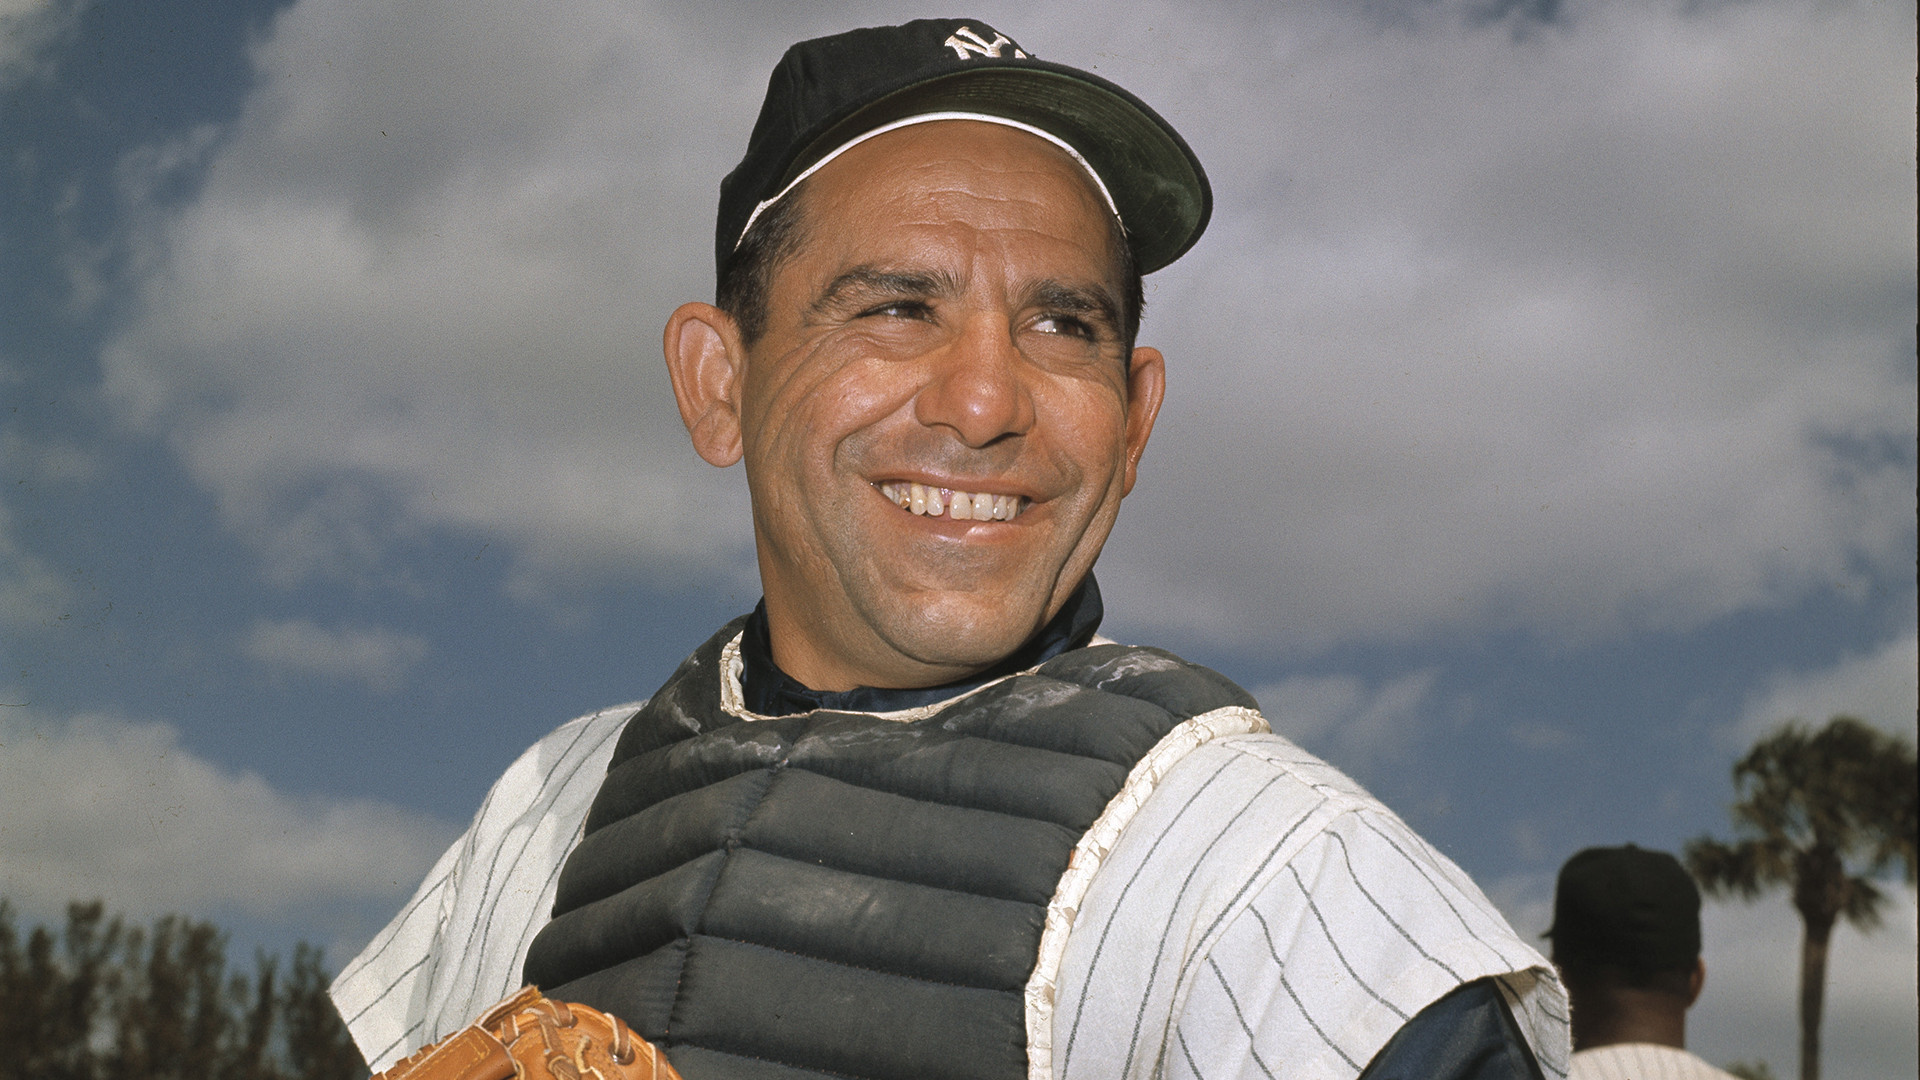  Yogi  Berra  Yankees icon and Hall of Fame catcher dies at 